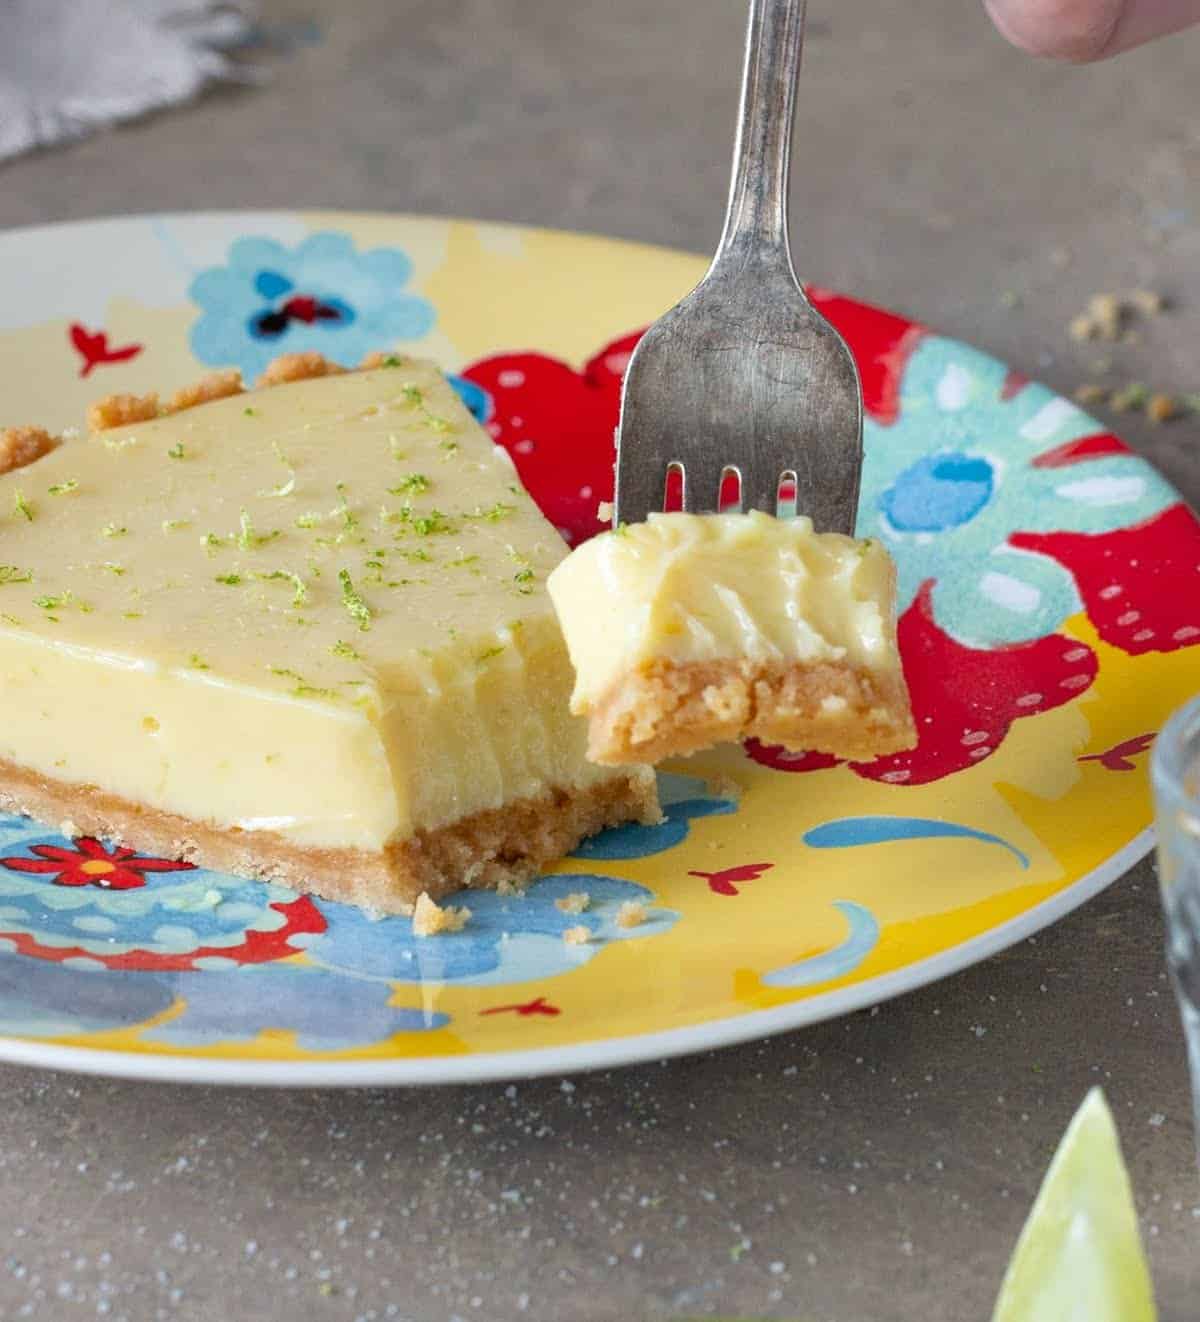 Fork with piece of key lime pie, rest of slice on colorful plate, grey surface.